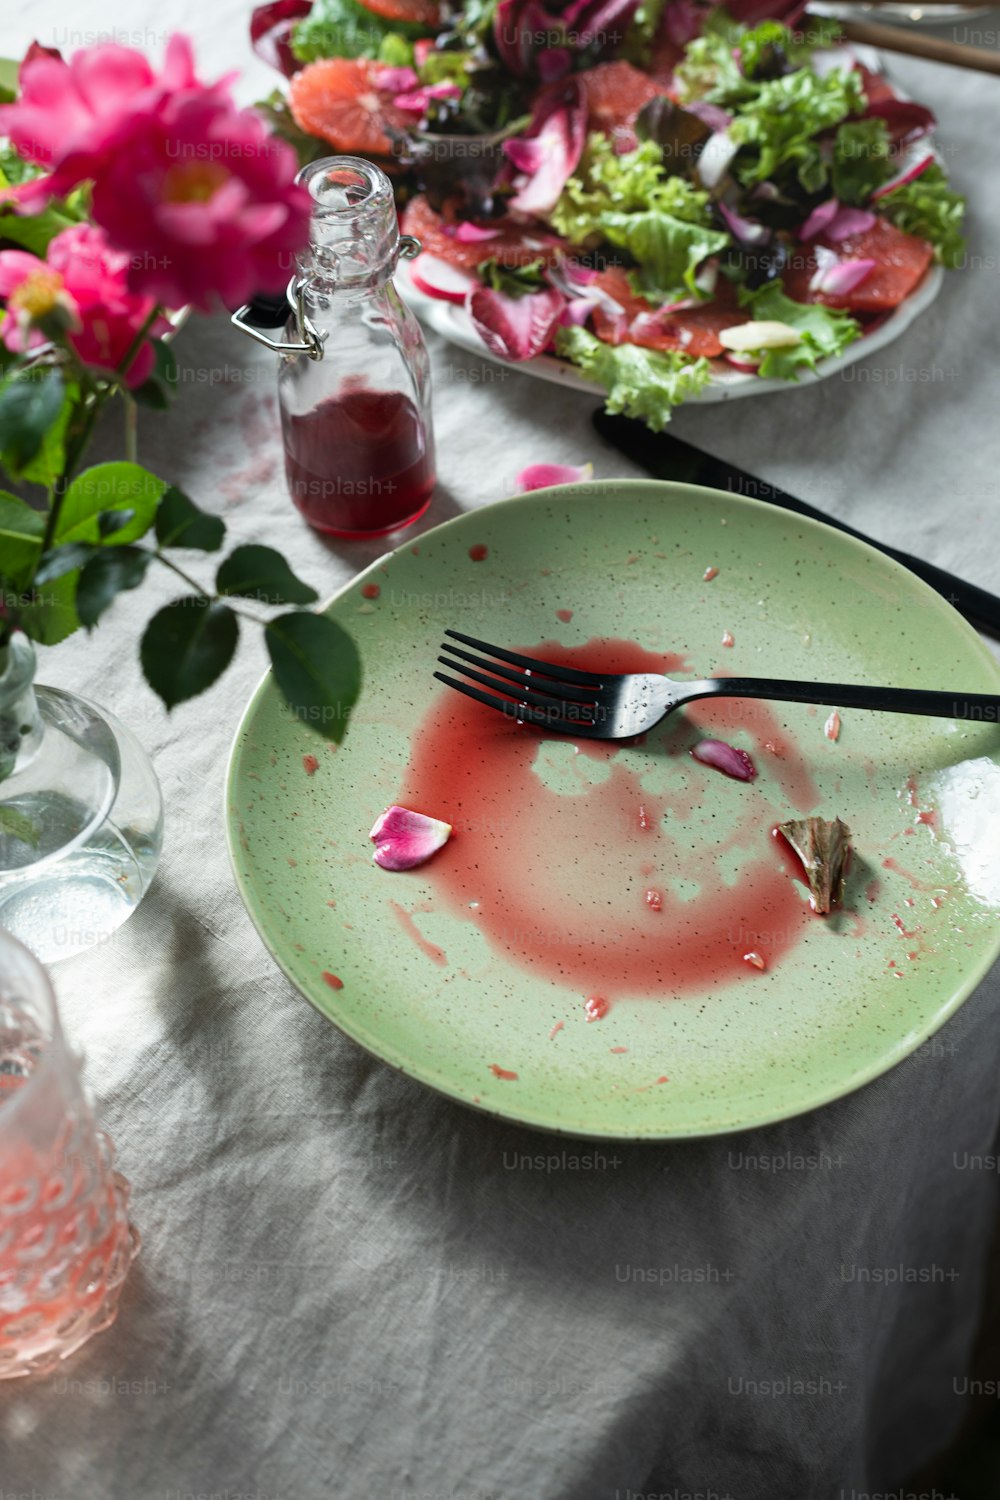 a plate with a knife and fork on a table